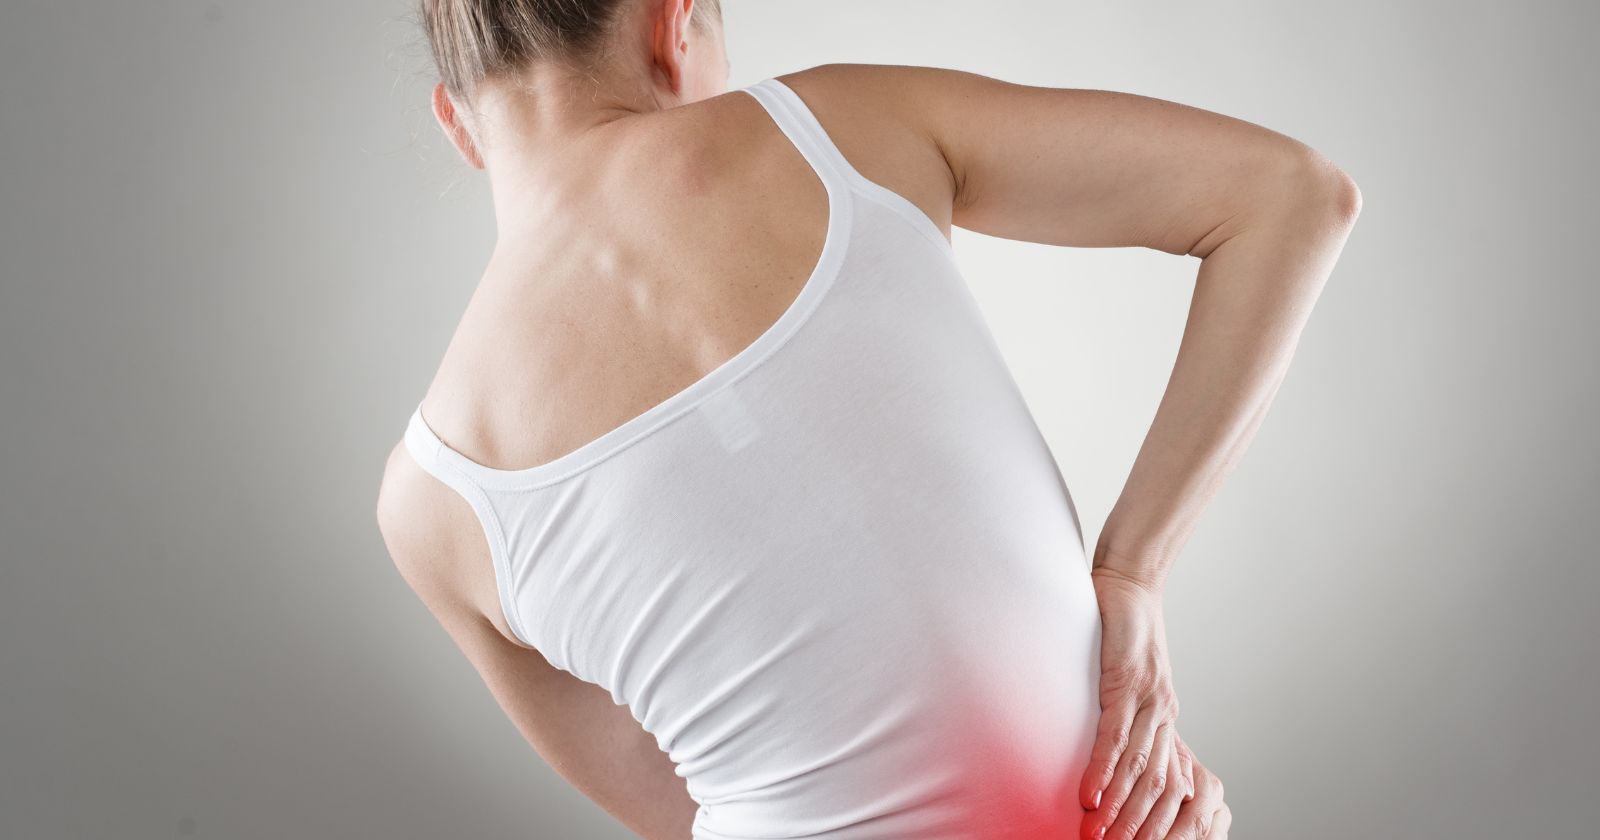 How To Ease Hip Pain In The Elderly